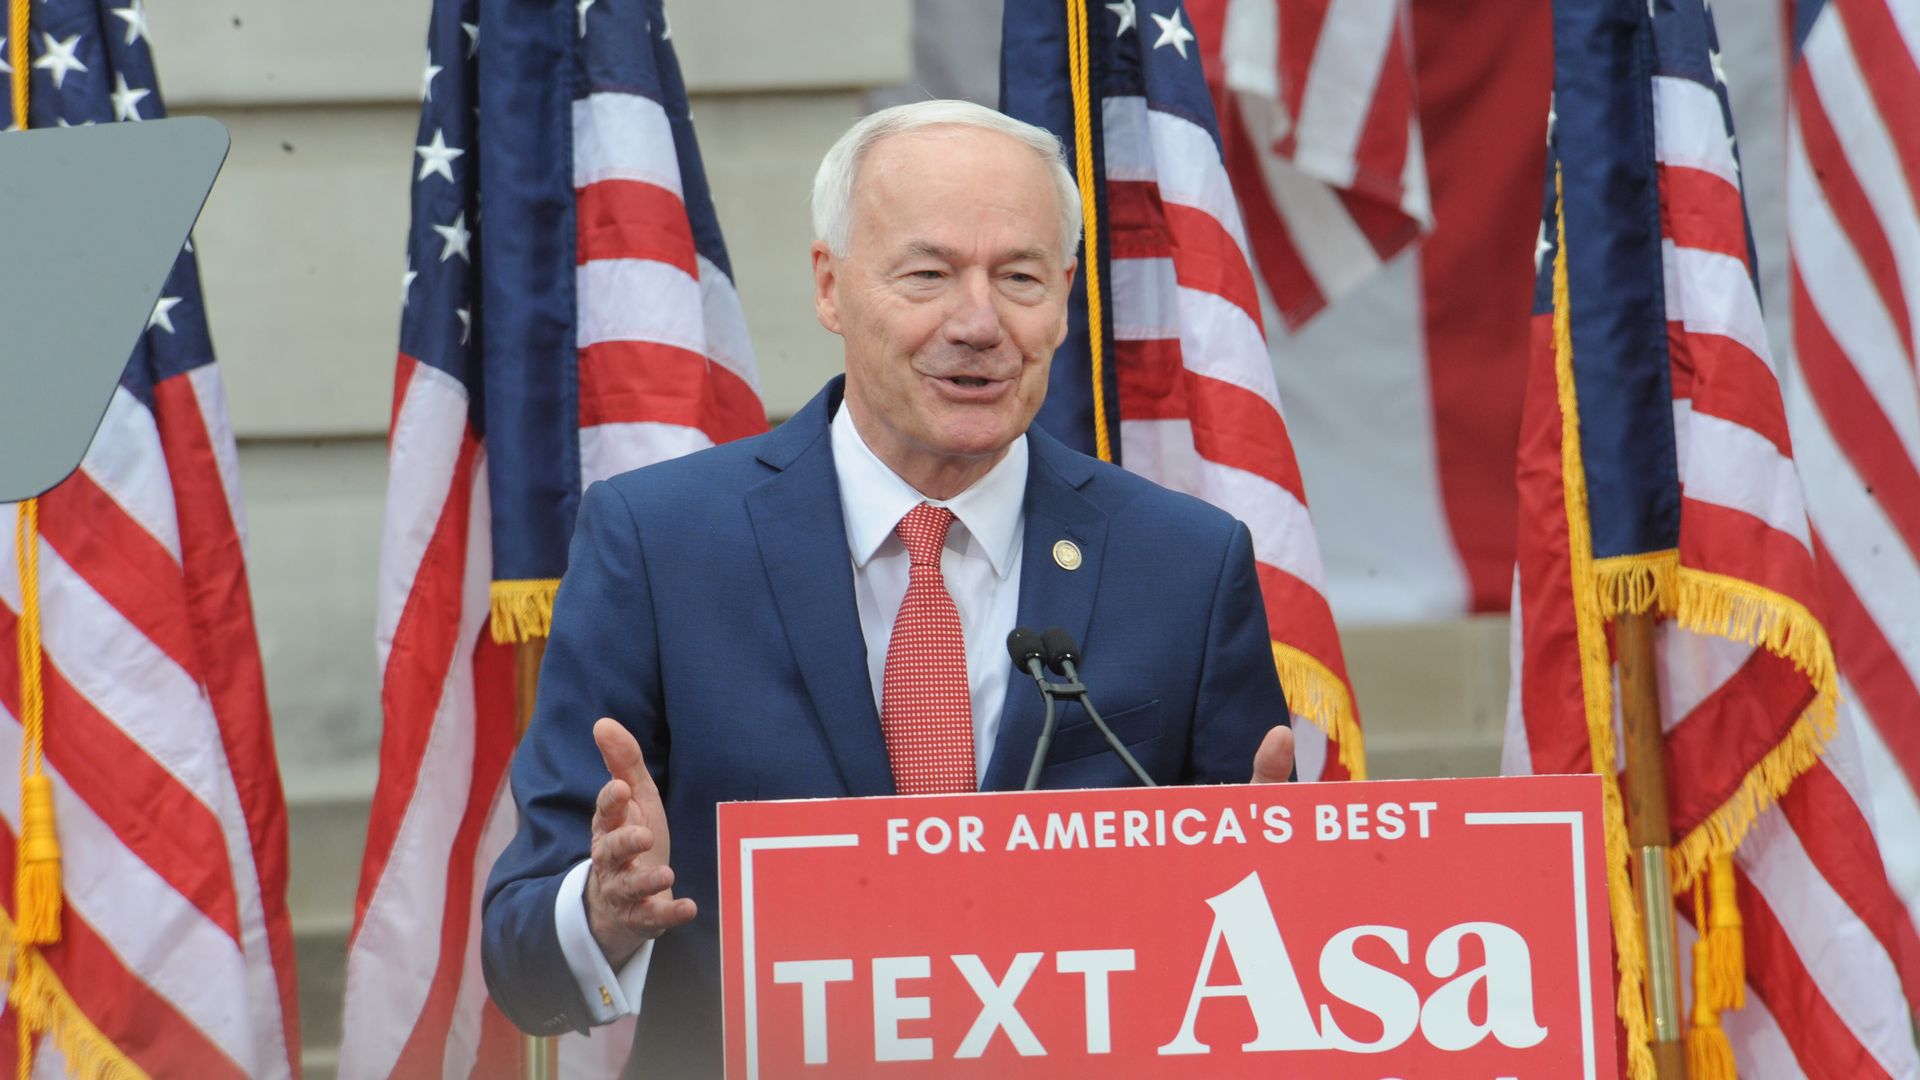 A photo of former Arkansas Gov. Asa Hutchinson speaking at a podium surrounded by American flags.